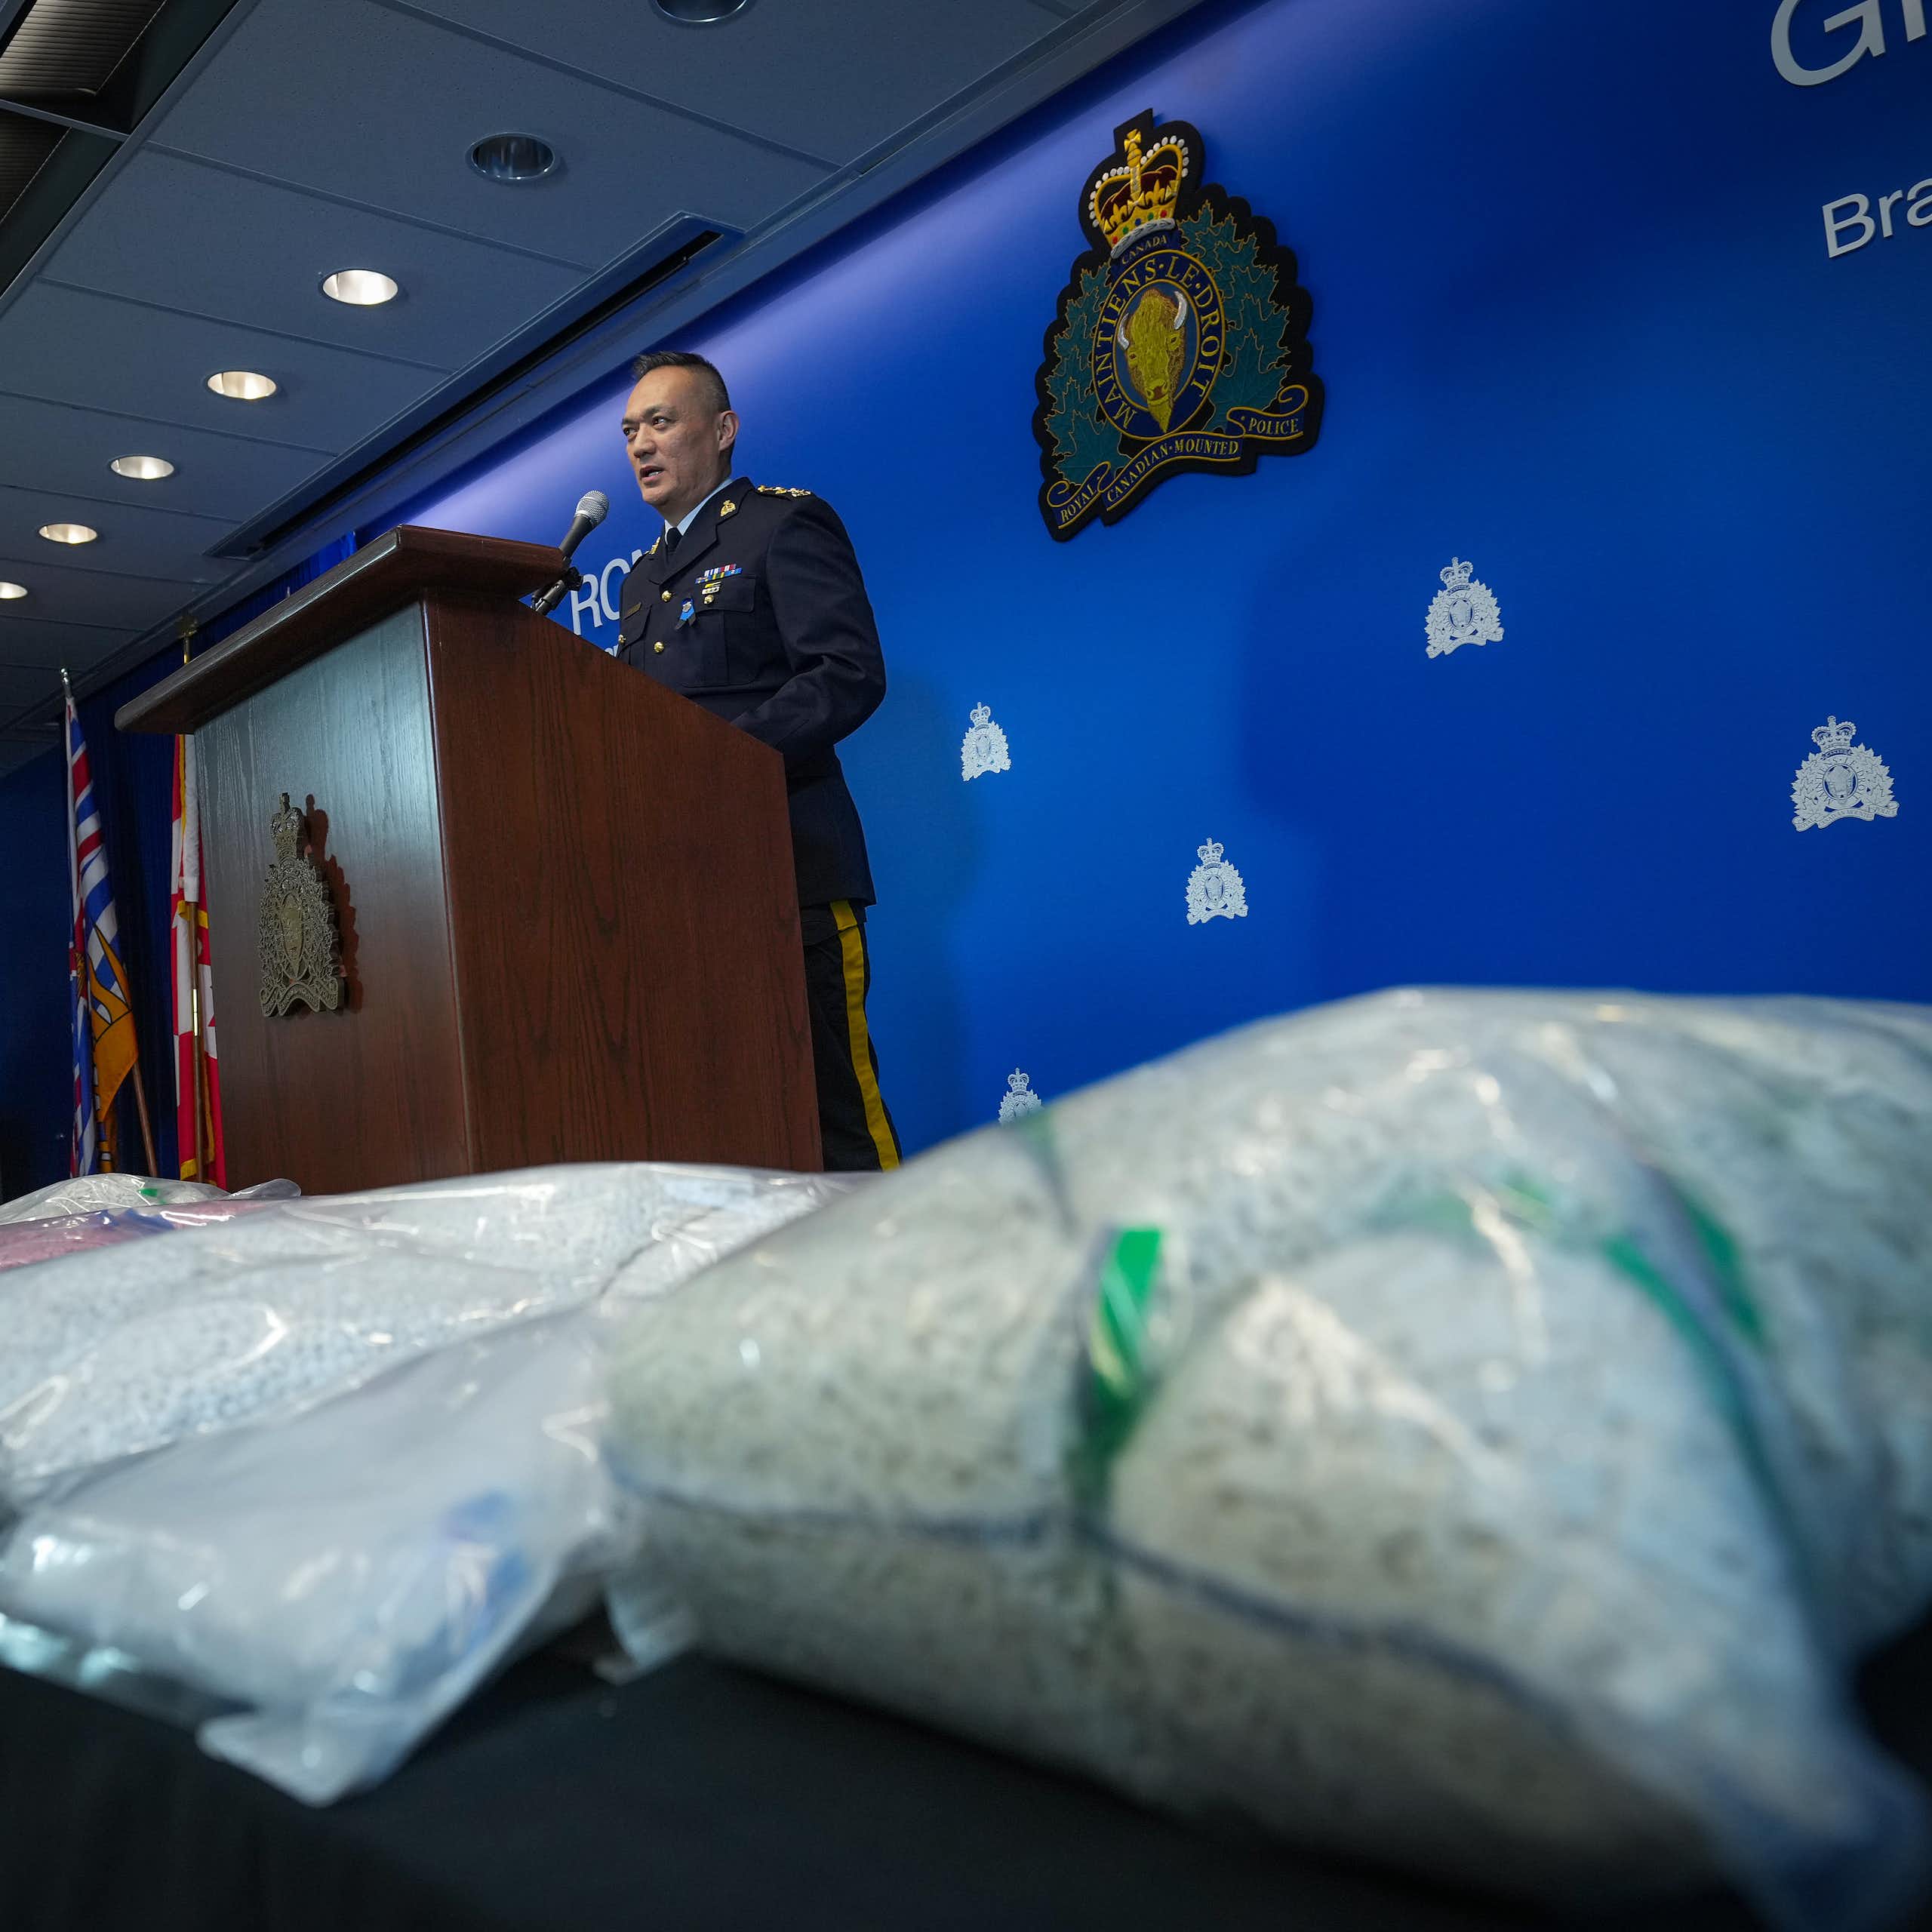 A police officer speaks into a microphone from behind a wooden lectern. Large packages of pills are in the foreground.